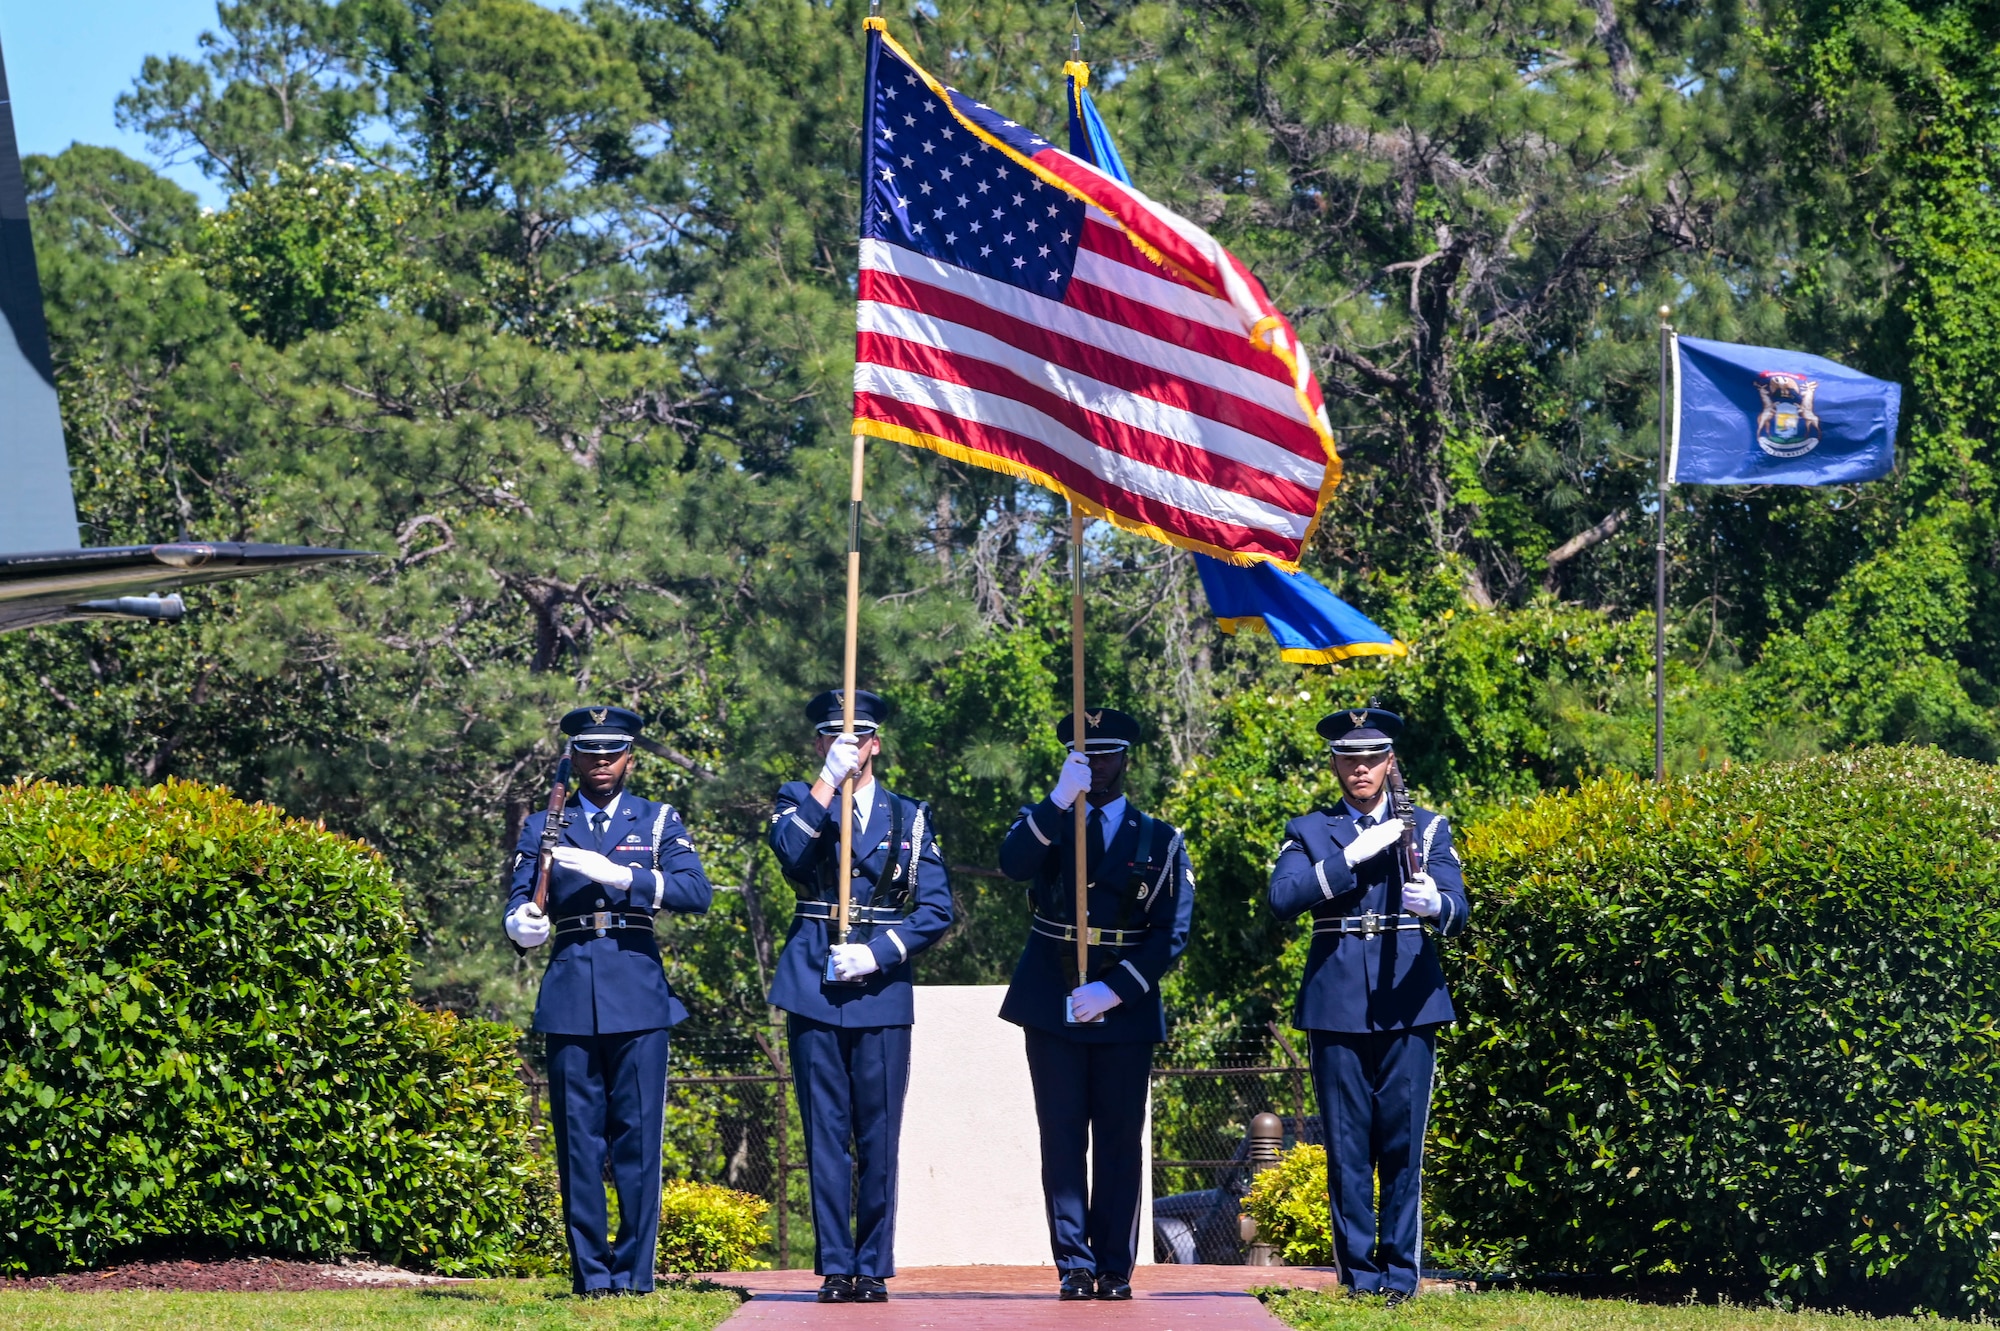 U.S. Air Force base Honor Guardsmen, assigned to the 1st Special Operations Force Support Squadron, present colors at the grand reopening of the memorial air park at Hurlburt Field, Florida, April 22, 2024.